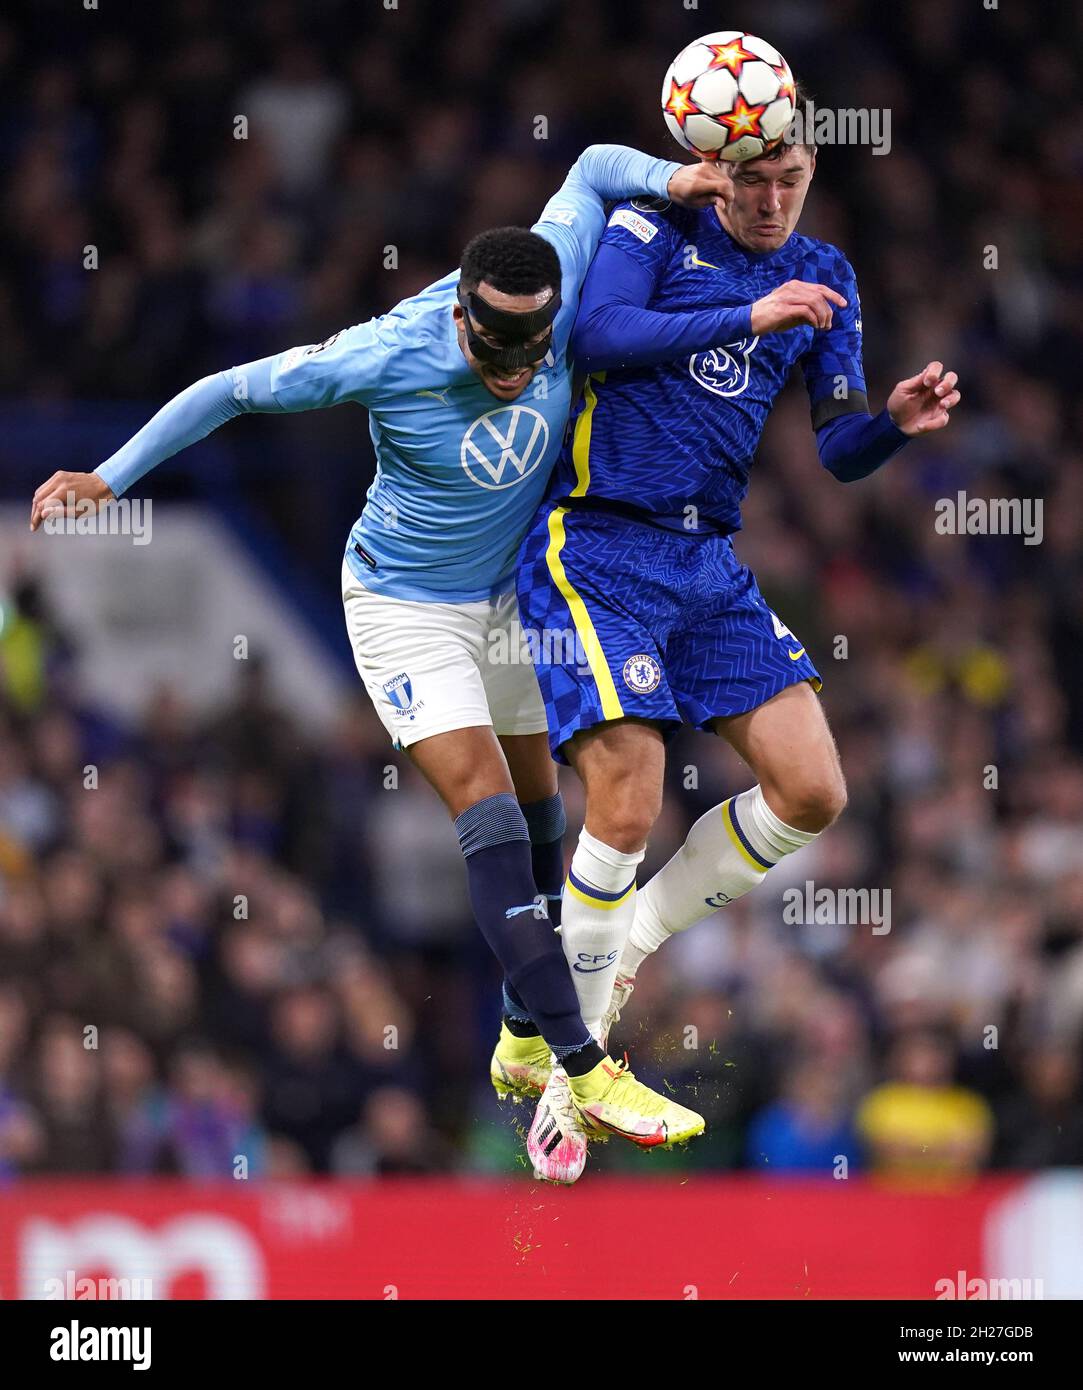 Malmo's Martin Olsson (left) and Chelsea's Andreas Christensen battle for the ball during the UEFA Champions League, Group H match at Stamford Bridge, London. Picture date: Wednesday October 20, 2021. Stock Photo